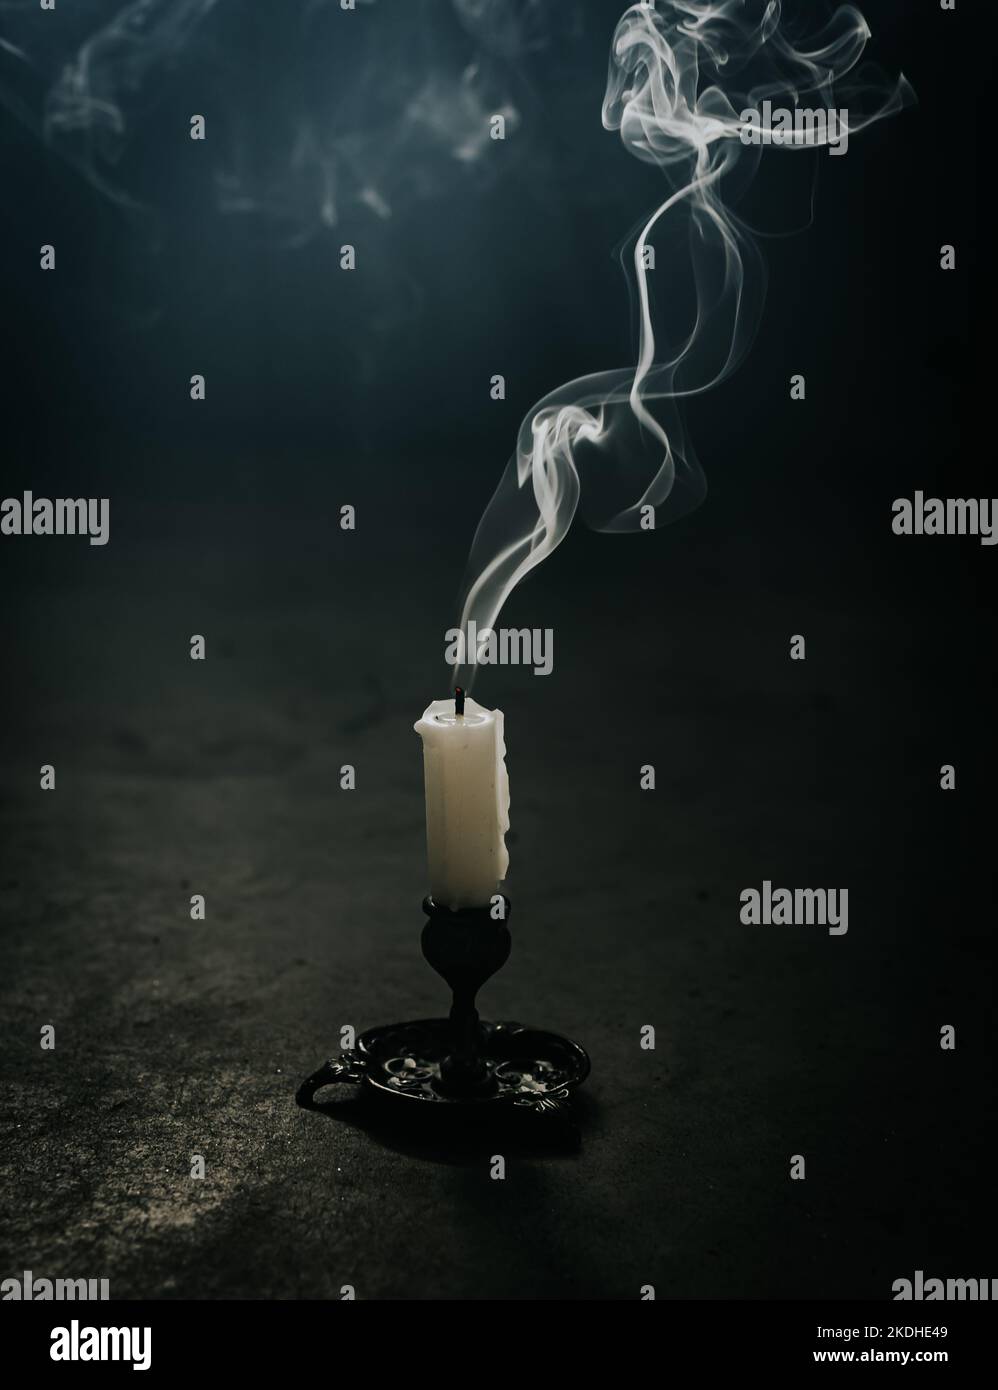 Smoke coming from a blown out candle on the floor of a dark room. Stock Photo